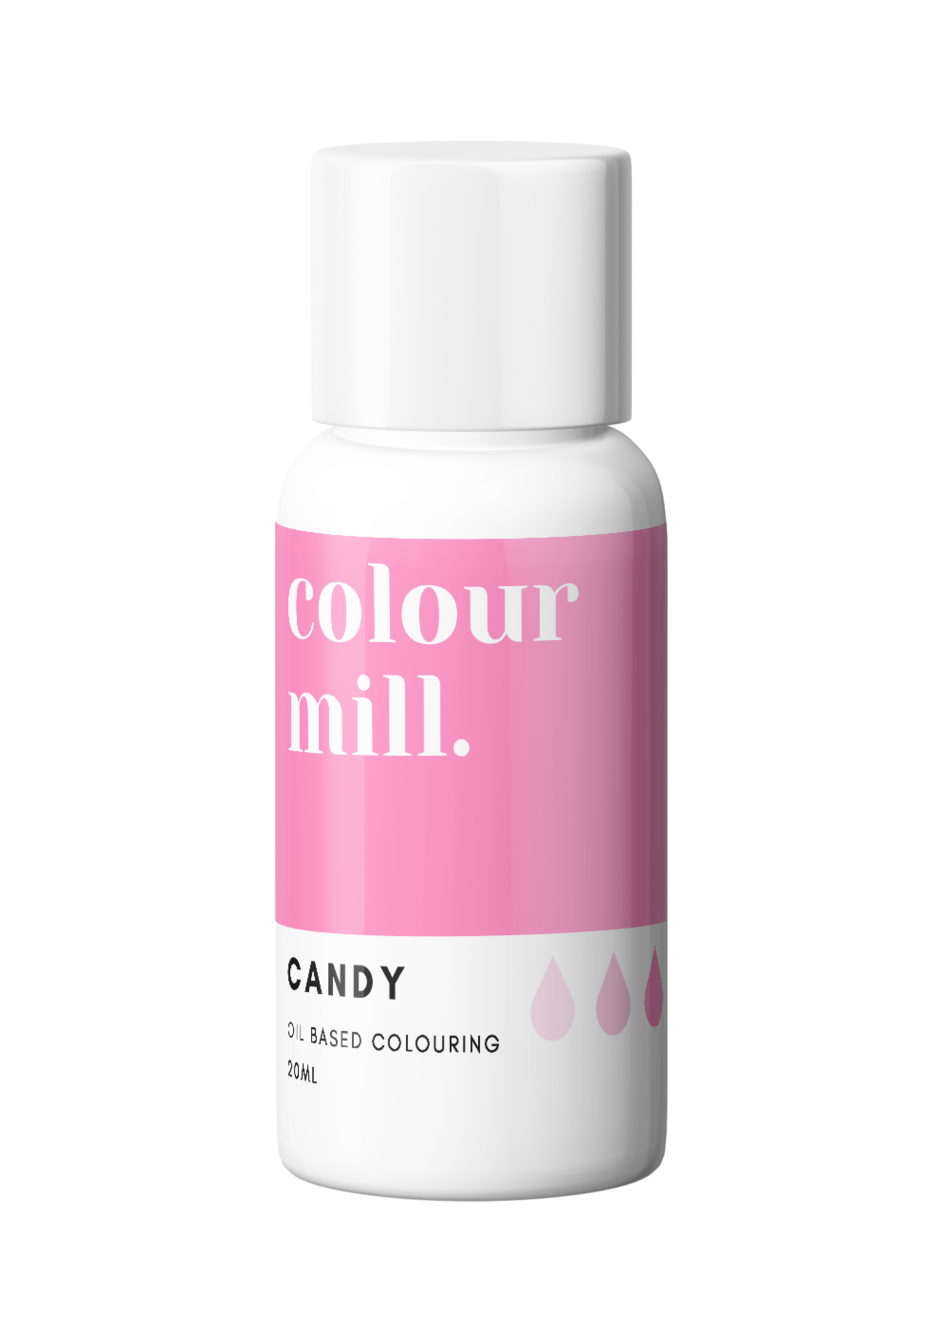 Candy, 20ml, Colour Mill Oil Based Colouring